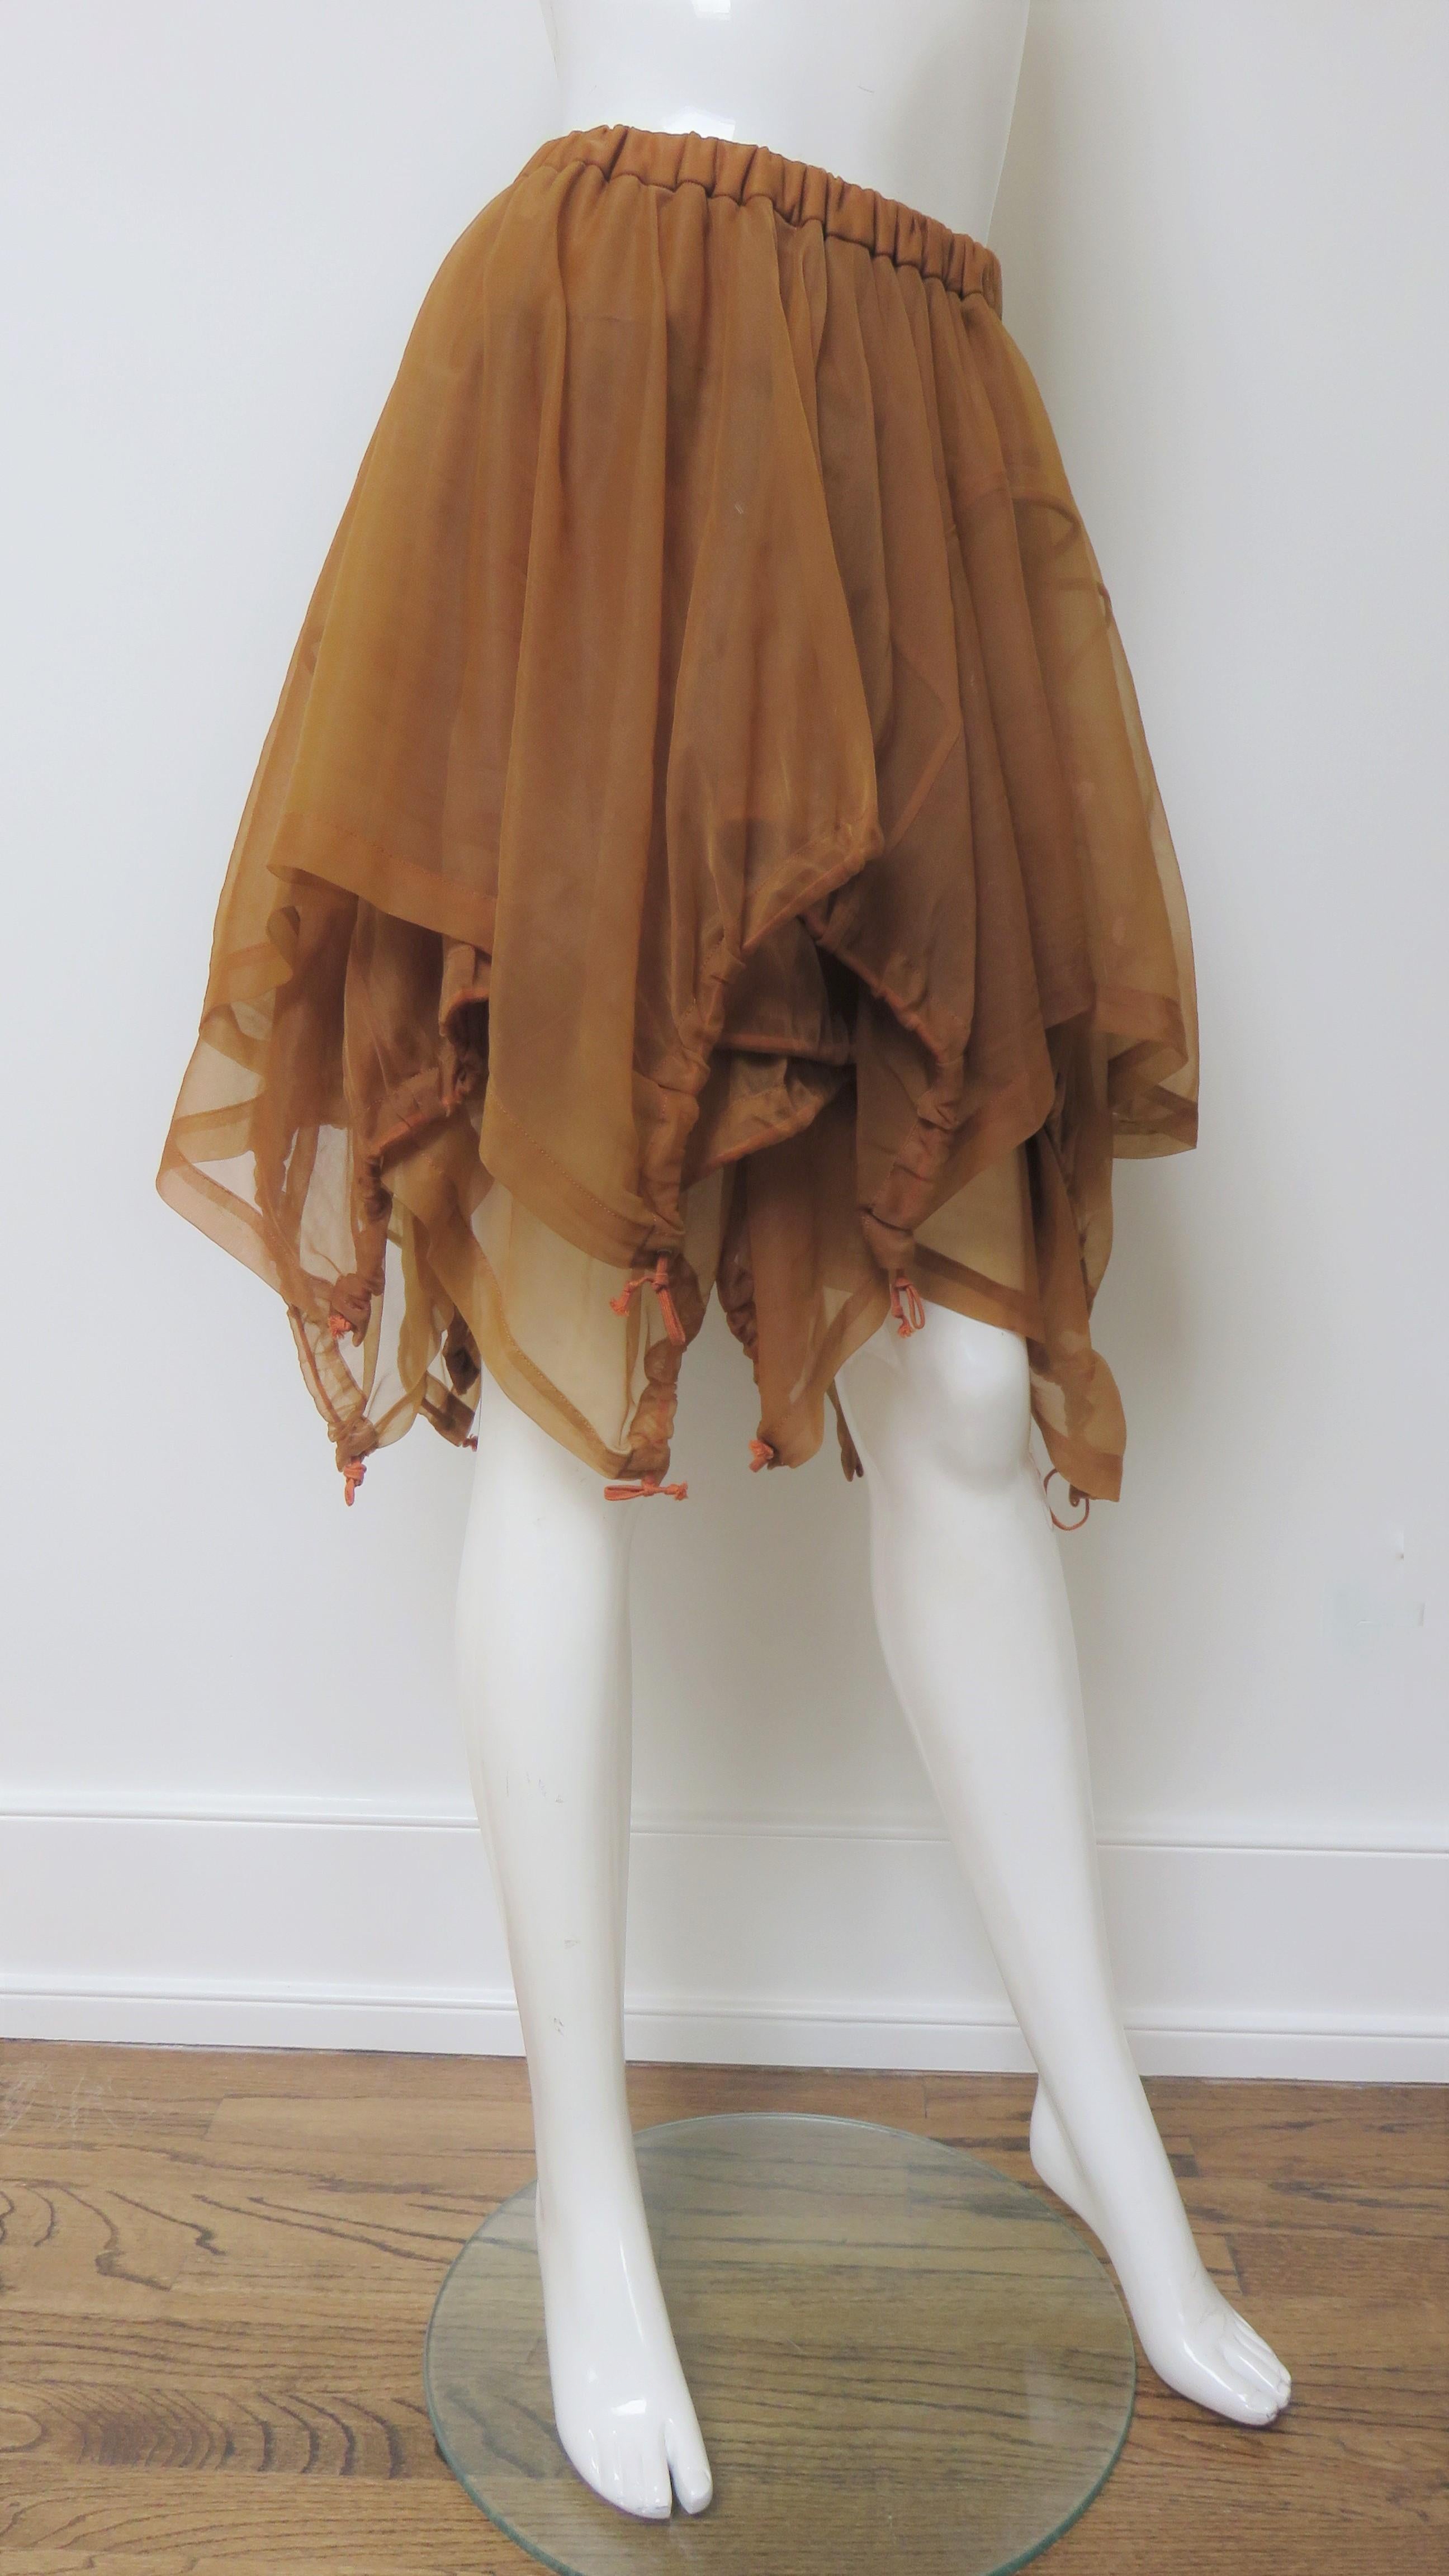 A fabulous brown parachute skirt from Comme des Garcons, CDG AD 1990 collection. The skirt is full comprised of draped, asymmetric, overlapping layers with pointed hems gathered onto a stretch waistband.  These panels have functional drawstring hems